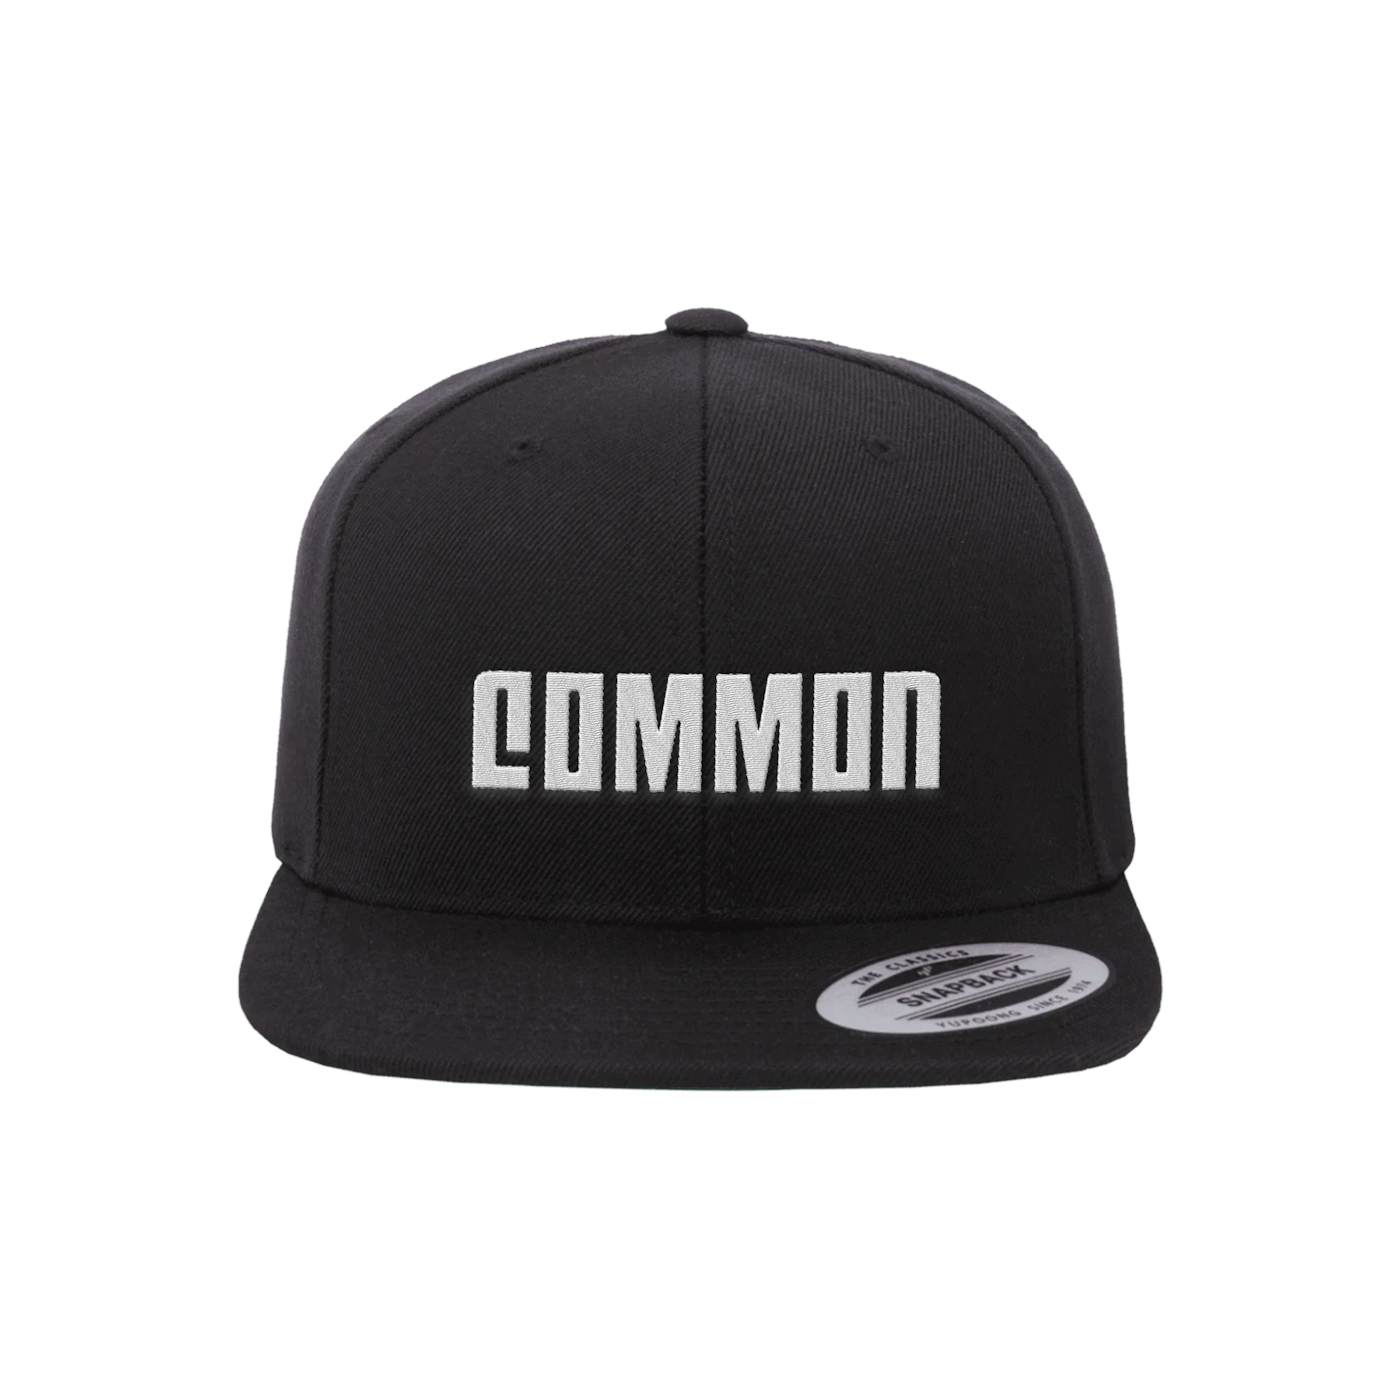 Common Logo Embroidered Hat